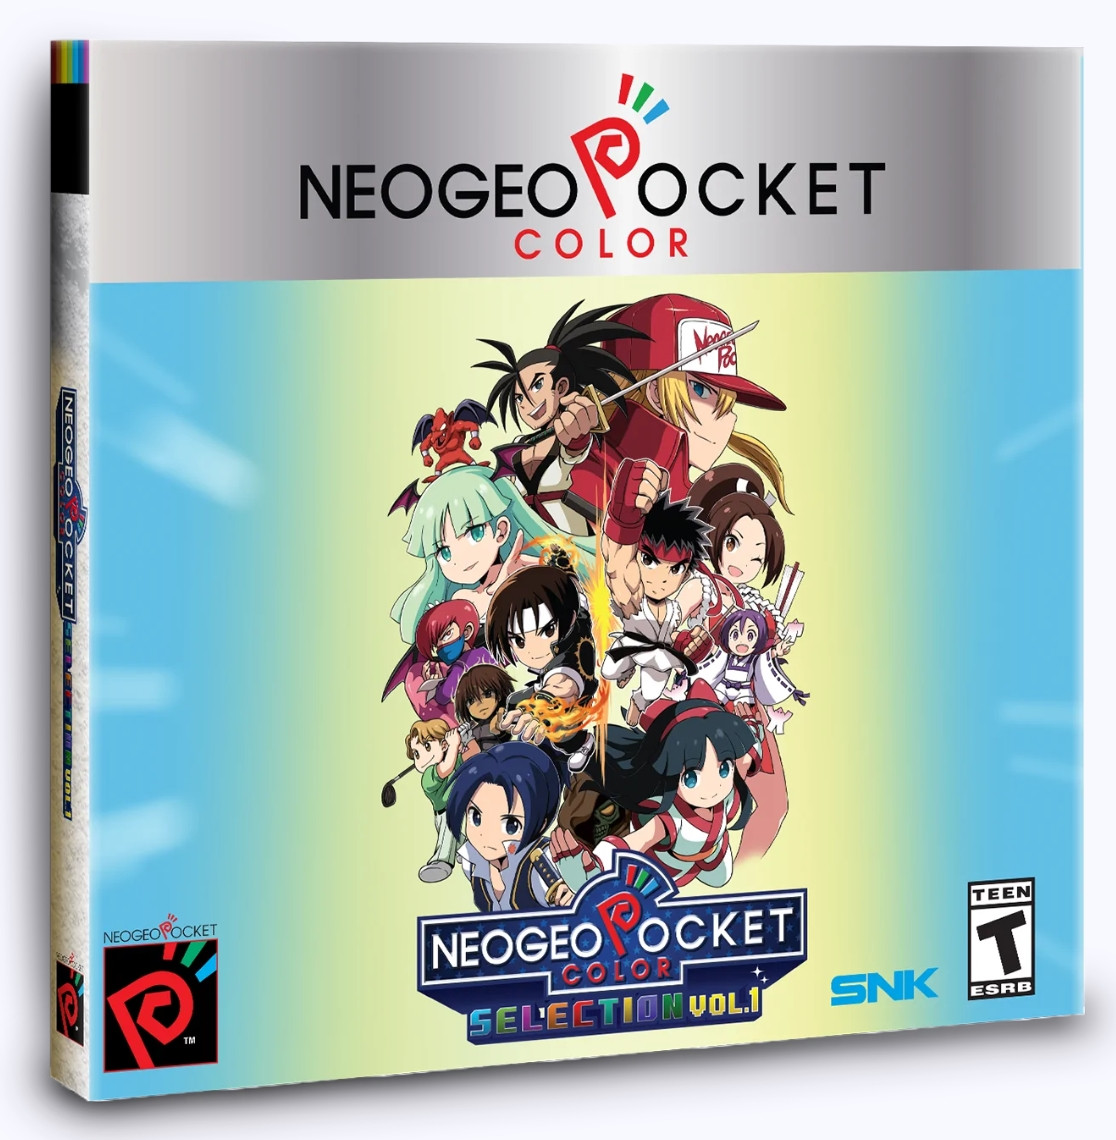 NeoGeo Pocket Color Selection Vol. 1 Classic Edition (Limited Run Games) - Nintendo Switch